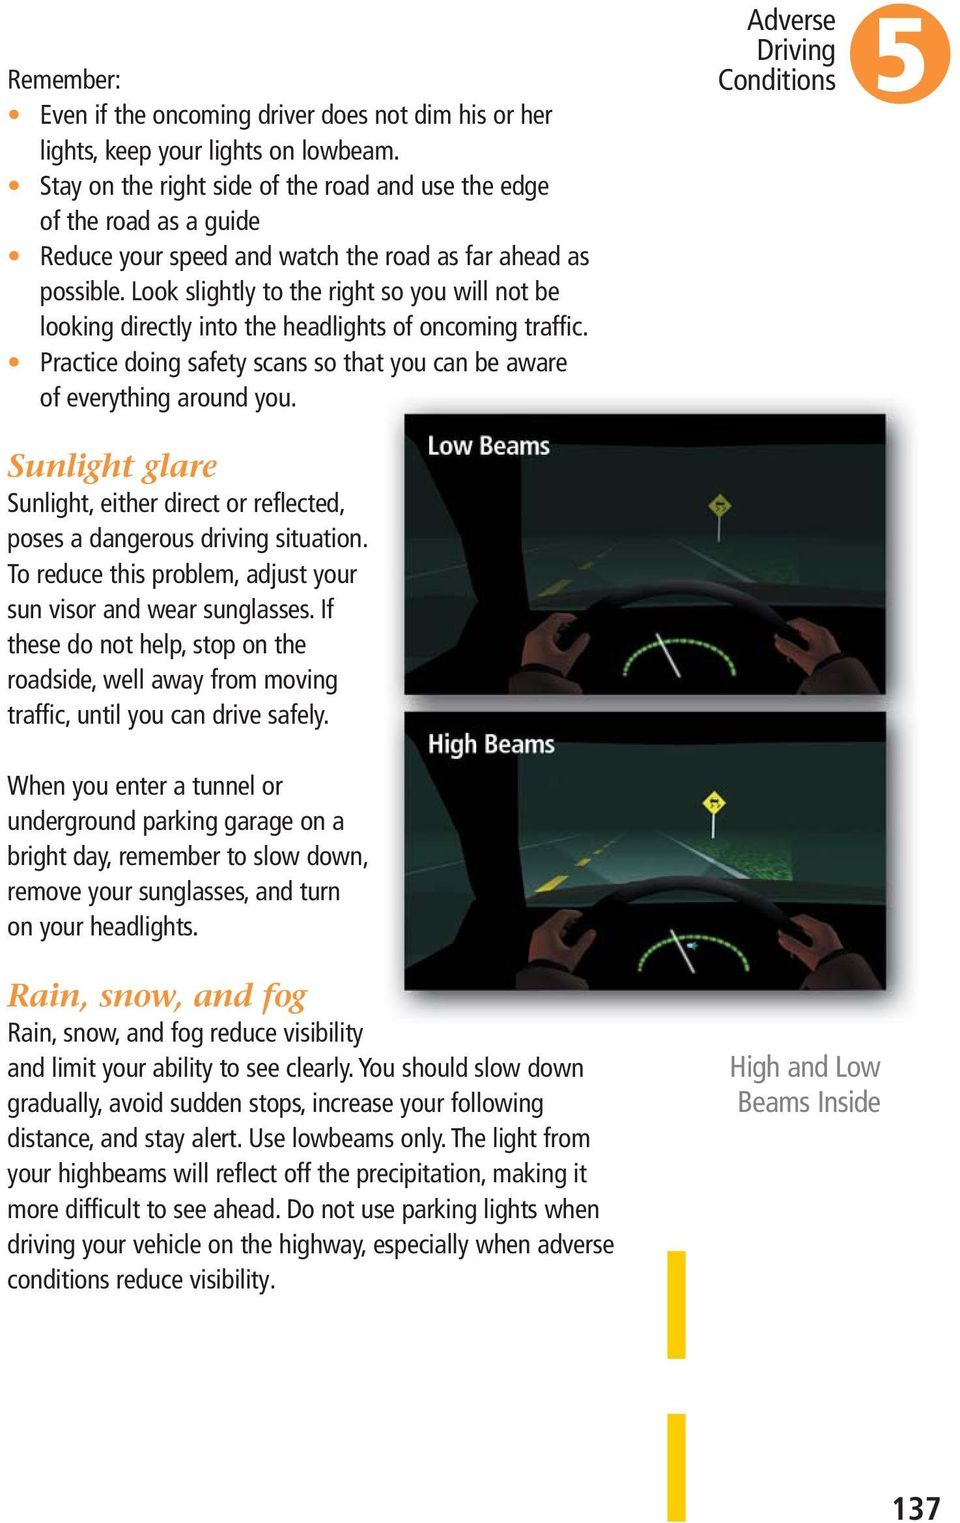 Look slightly to the right so you will not be looking directly into the headlights of oncoming traffic. Practice doing safety scans so that you can be aware of everything around you.